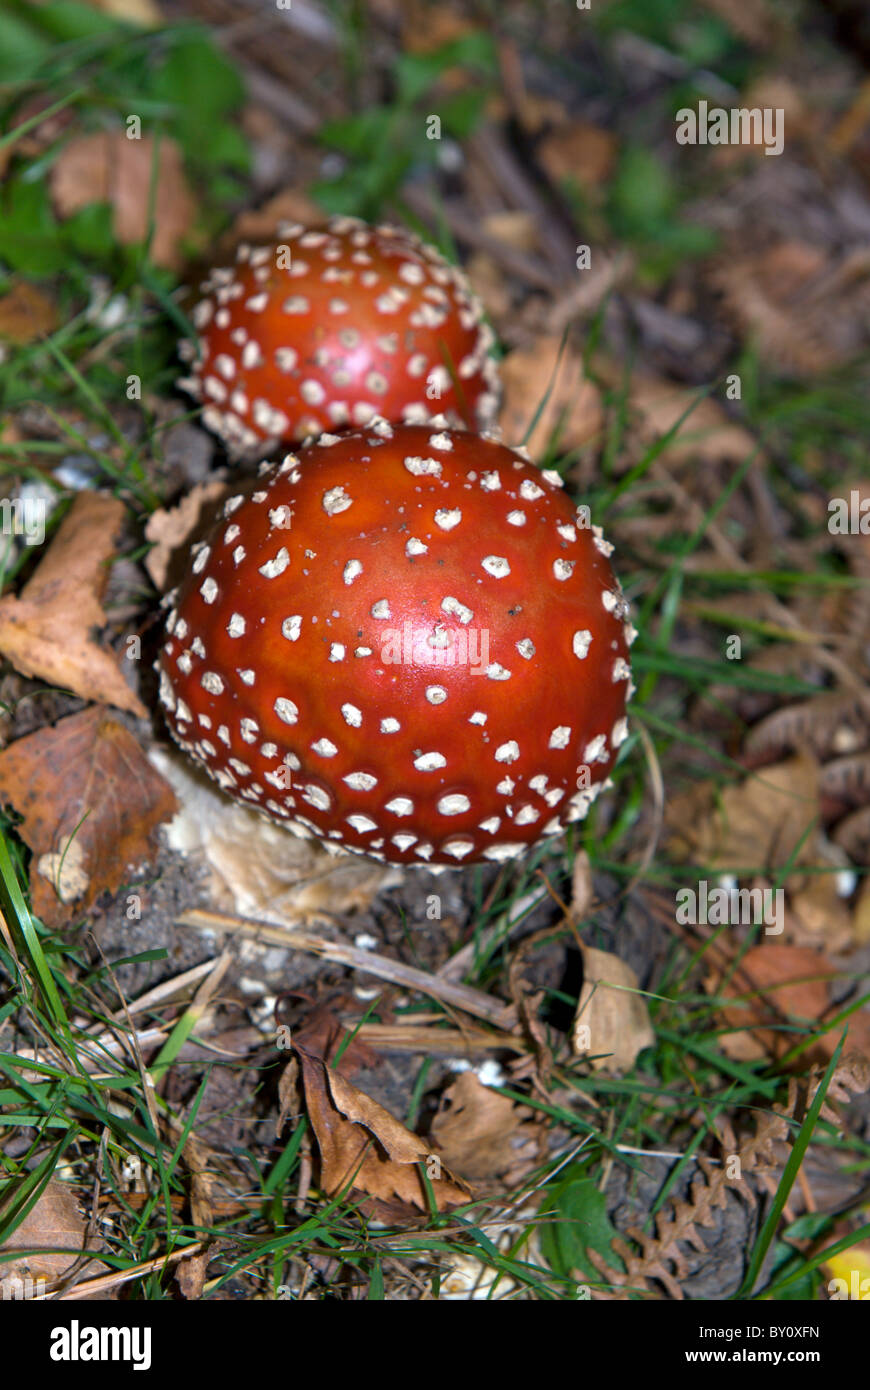 A fly agaric with its bright red cap and white spots amongst autumn leaves Stock Photo